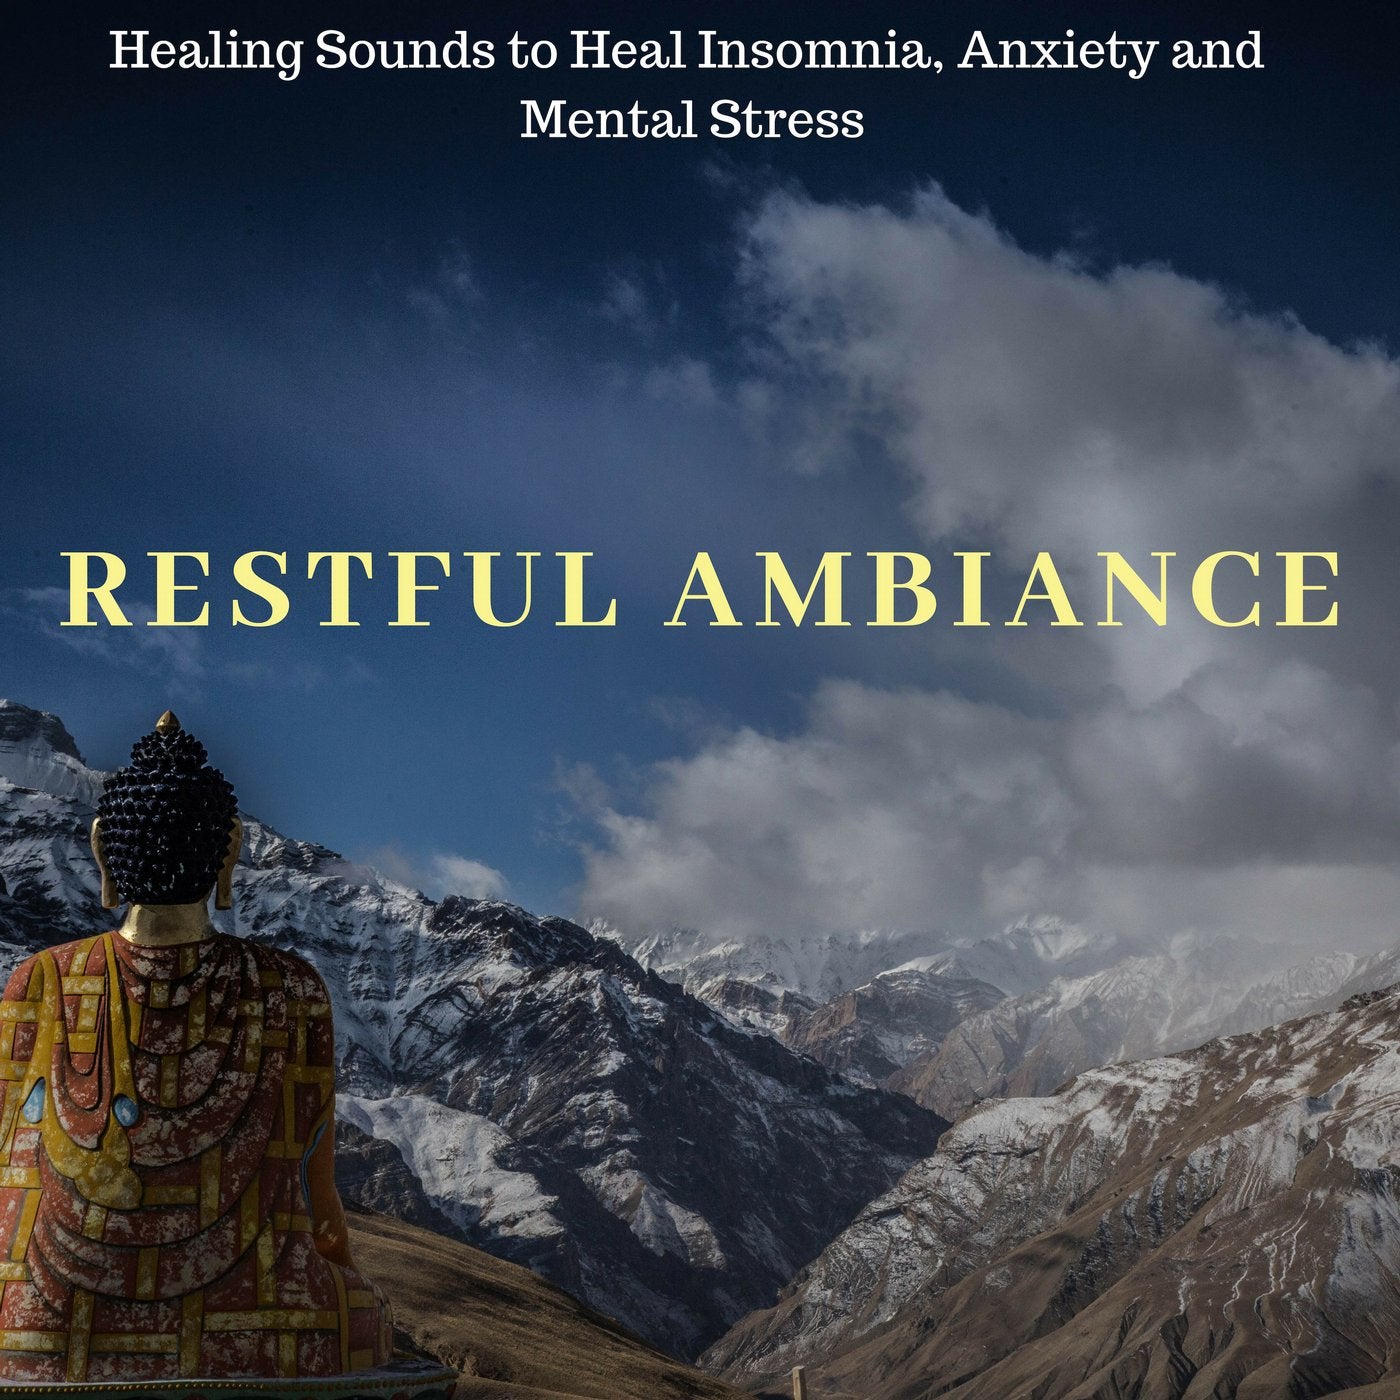 Restful Ambiance - Healing Sounds To Heal Insomnia, Anxiety And Mental Stress